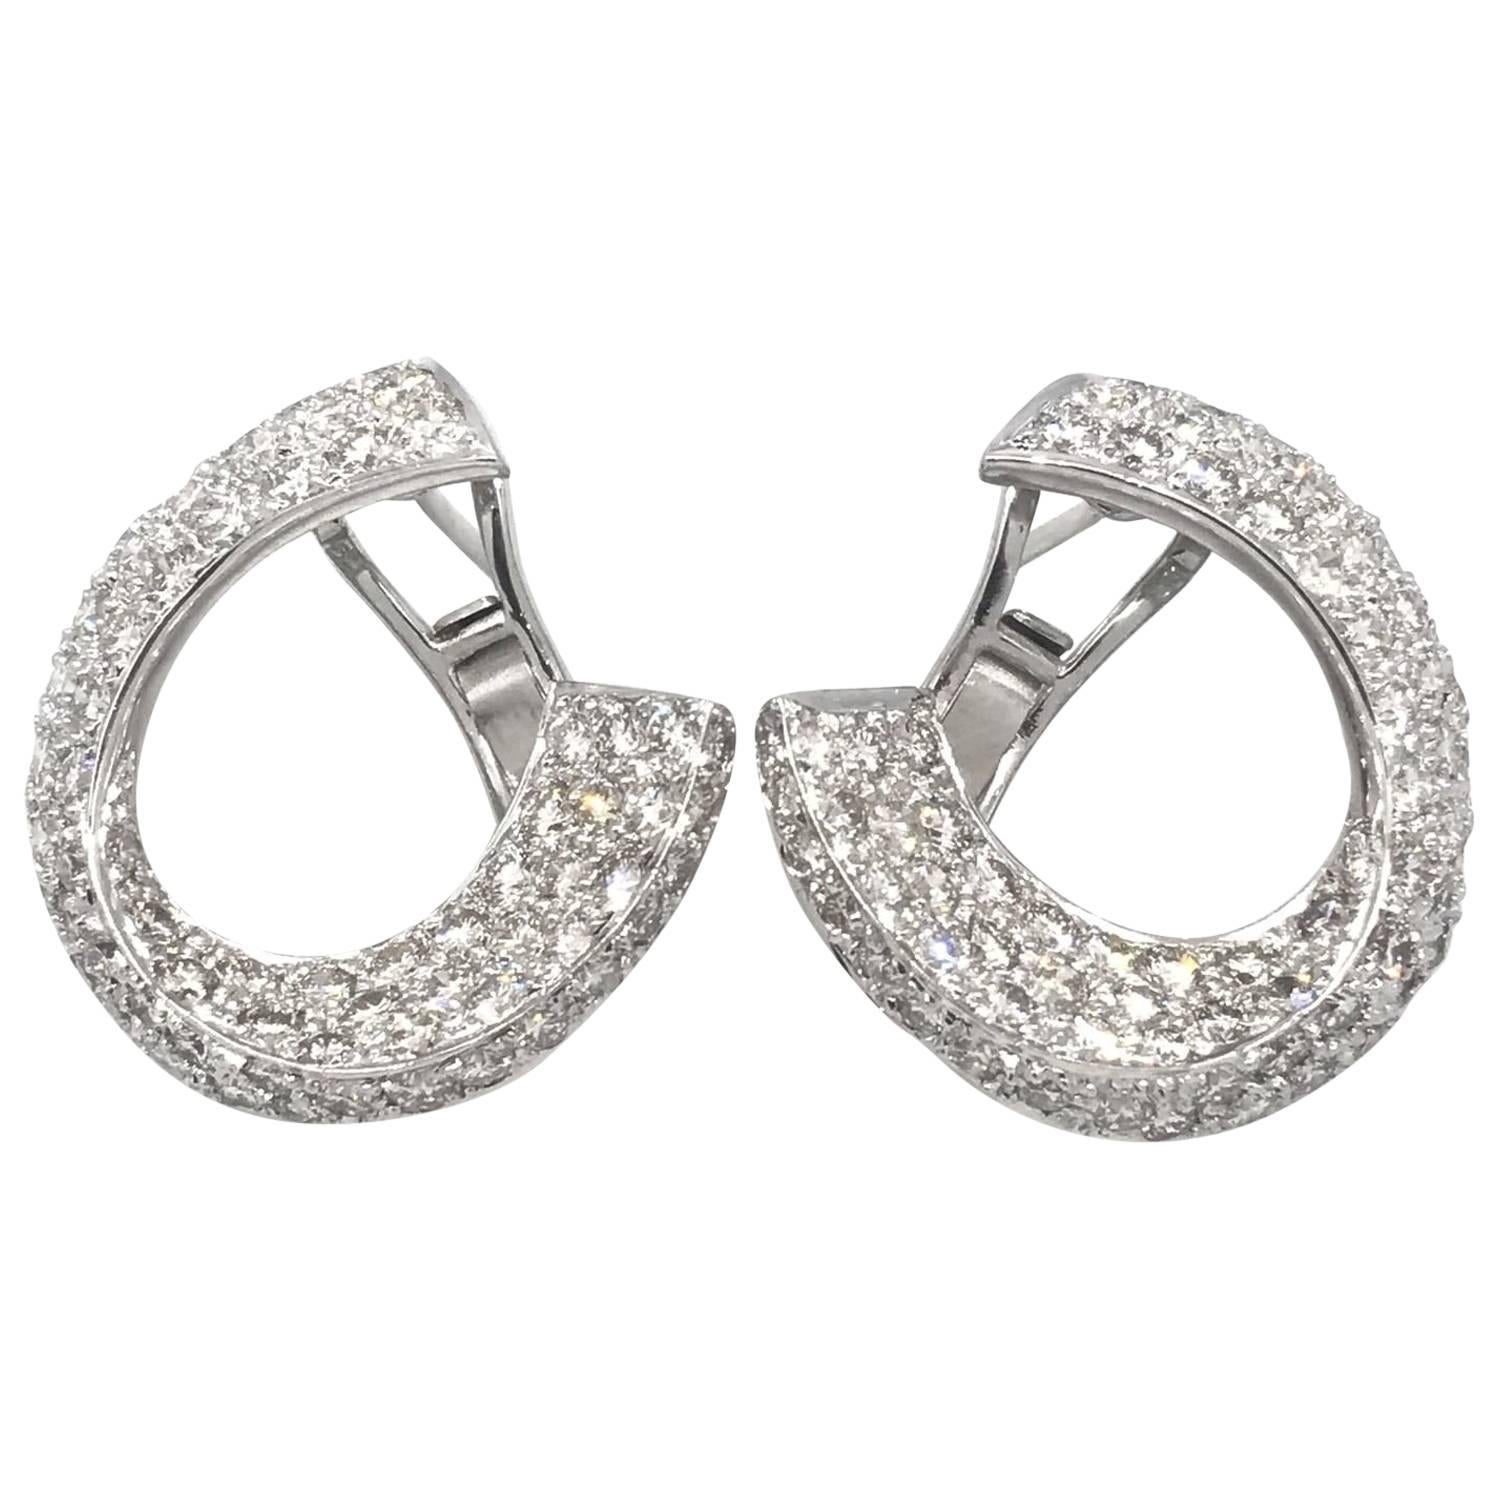 Crescent Shaped Pave Diamond Earrings 5.50 Carat in 18 Karat White Gold For Sale